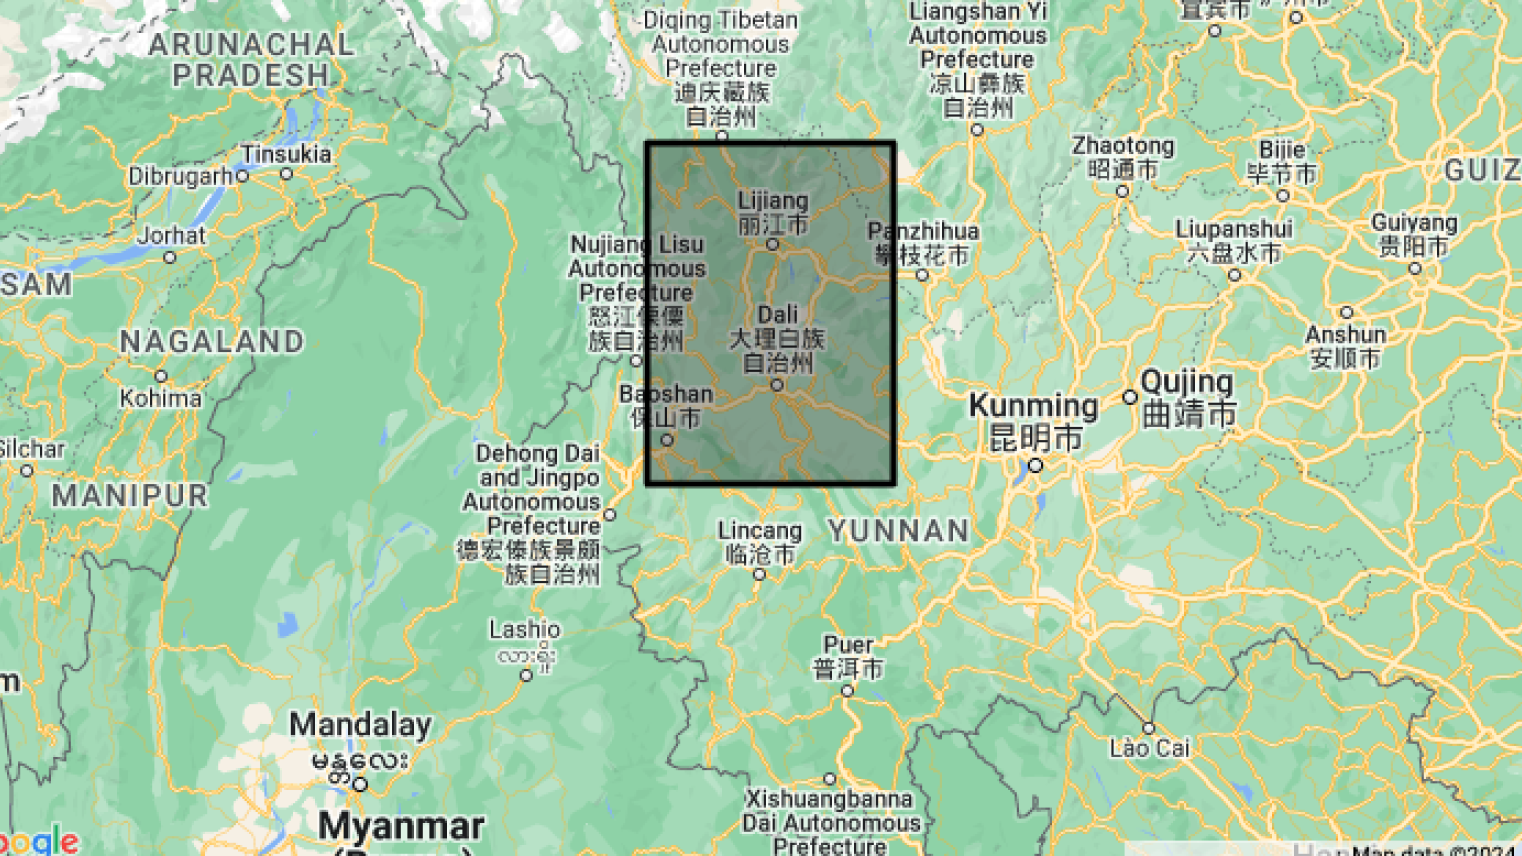 The location of Wuxing village in Heqing County where Kua'nsi is spoken.